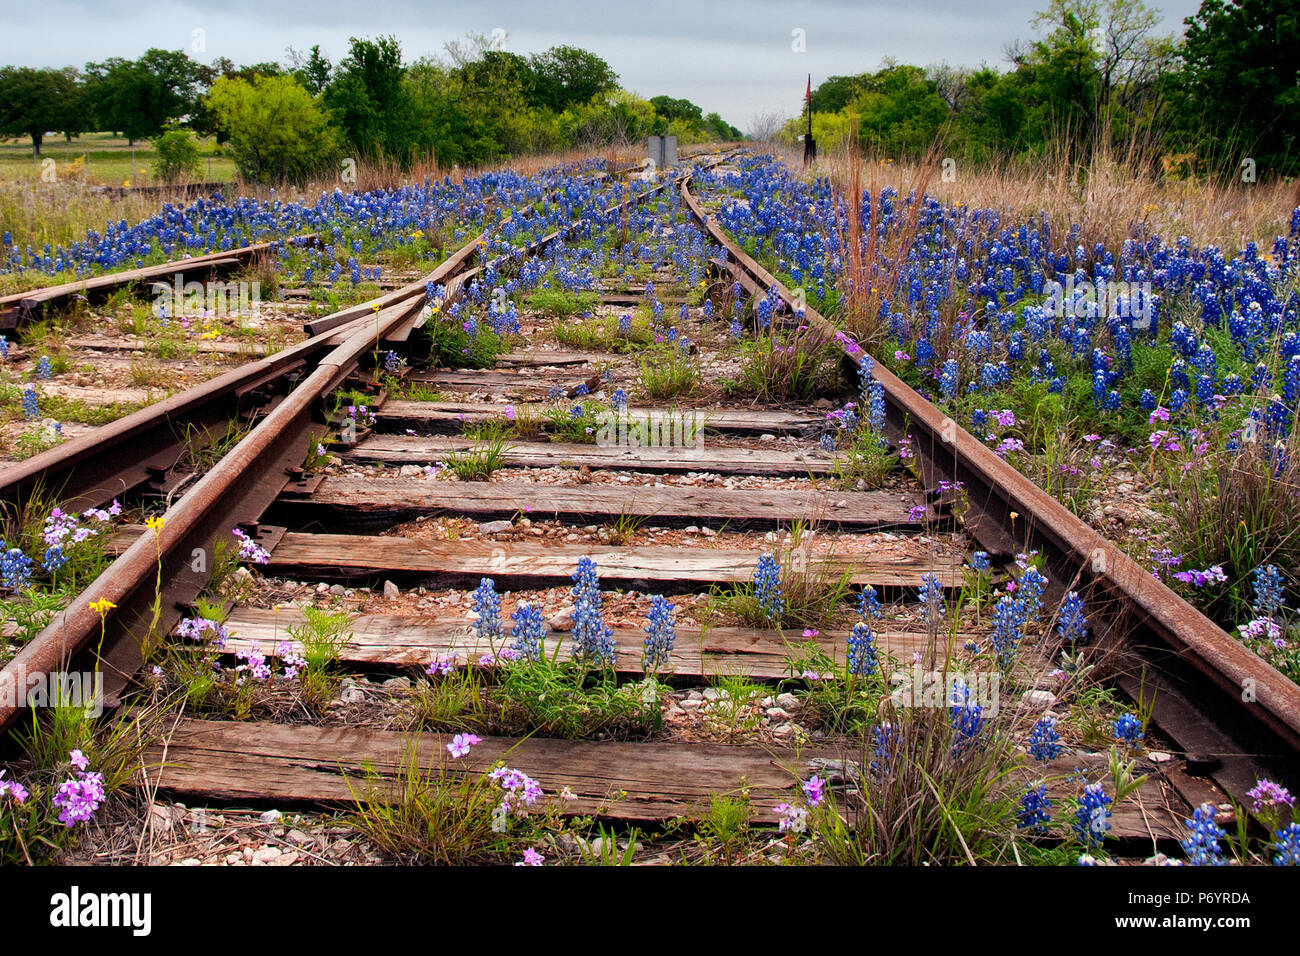 Bluebonnets at the crossroads. Abandoned railroad tracks with leading lines overtaken with Texas Wildflowers and Bluebonnets. Stock Photo